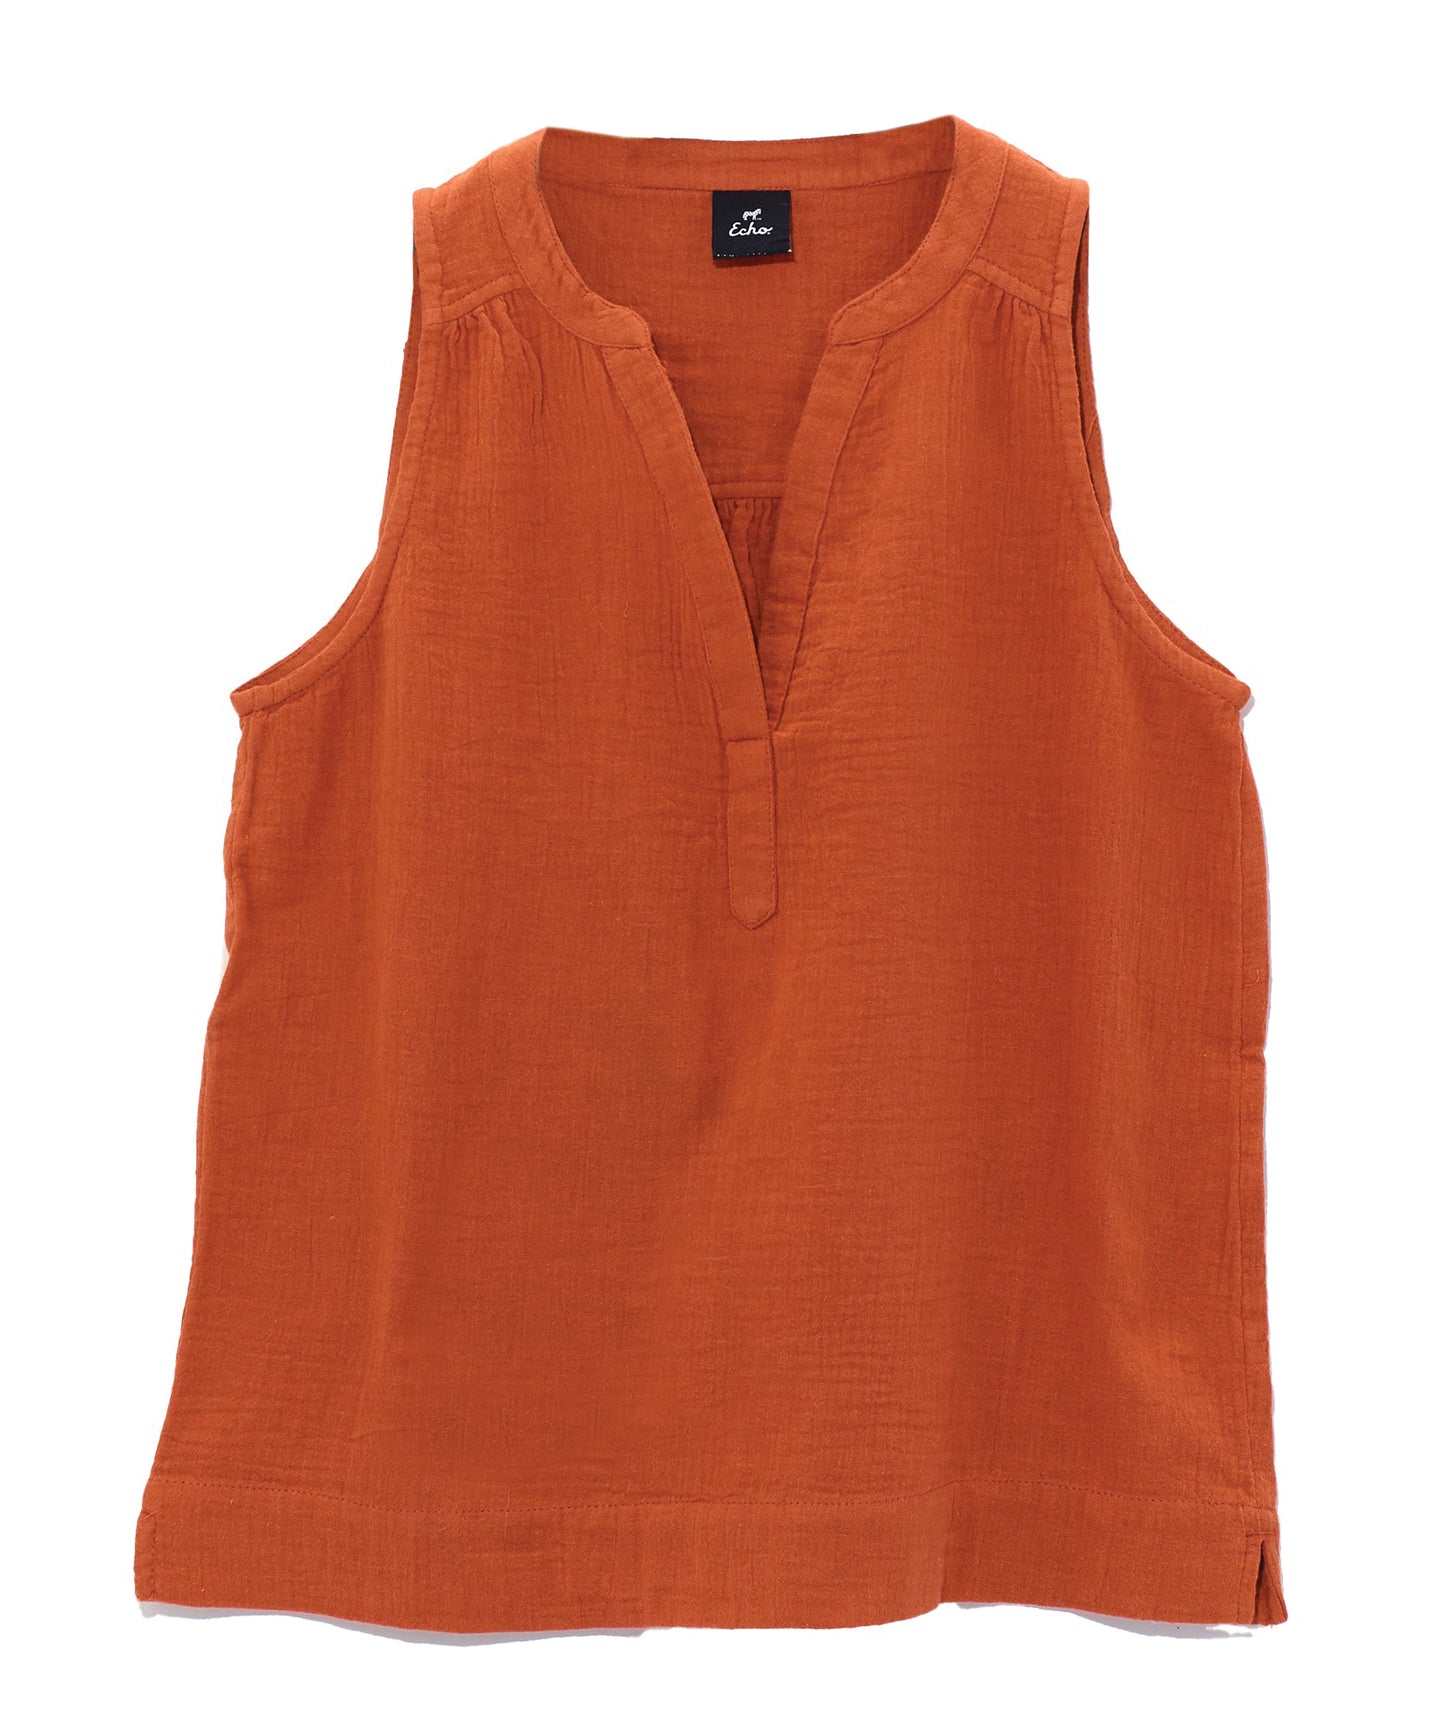 Double Gauze Sleeveless Top in color Sienna